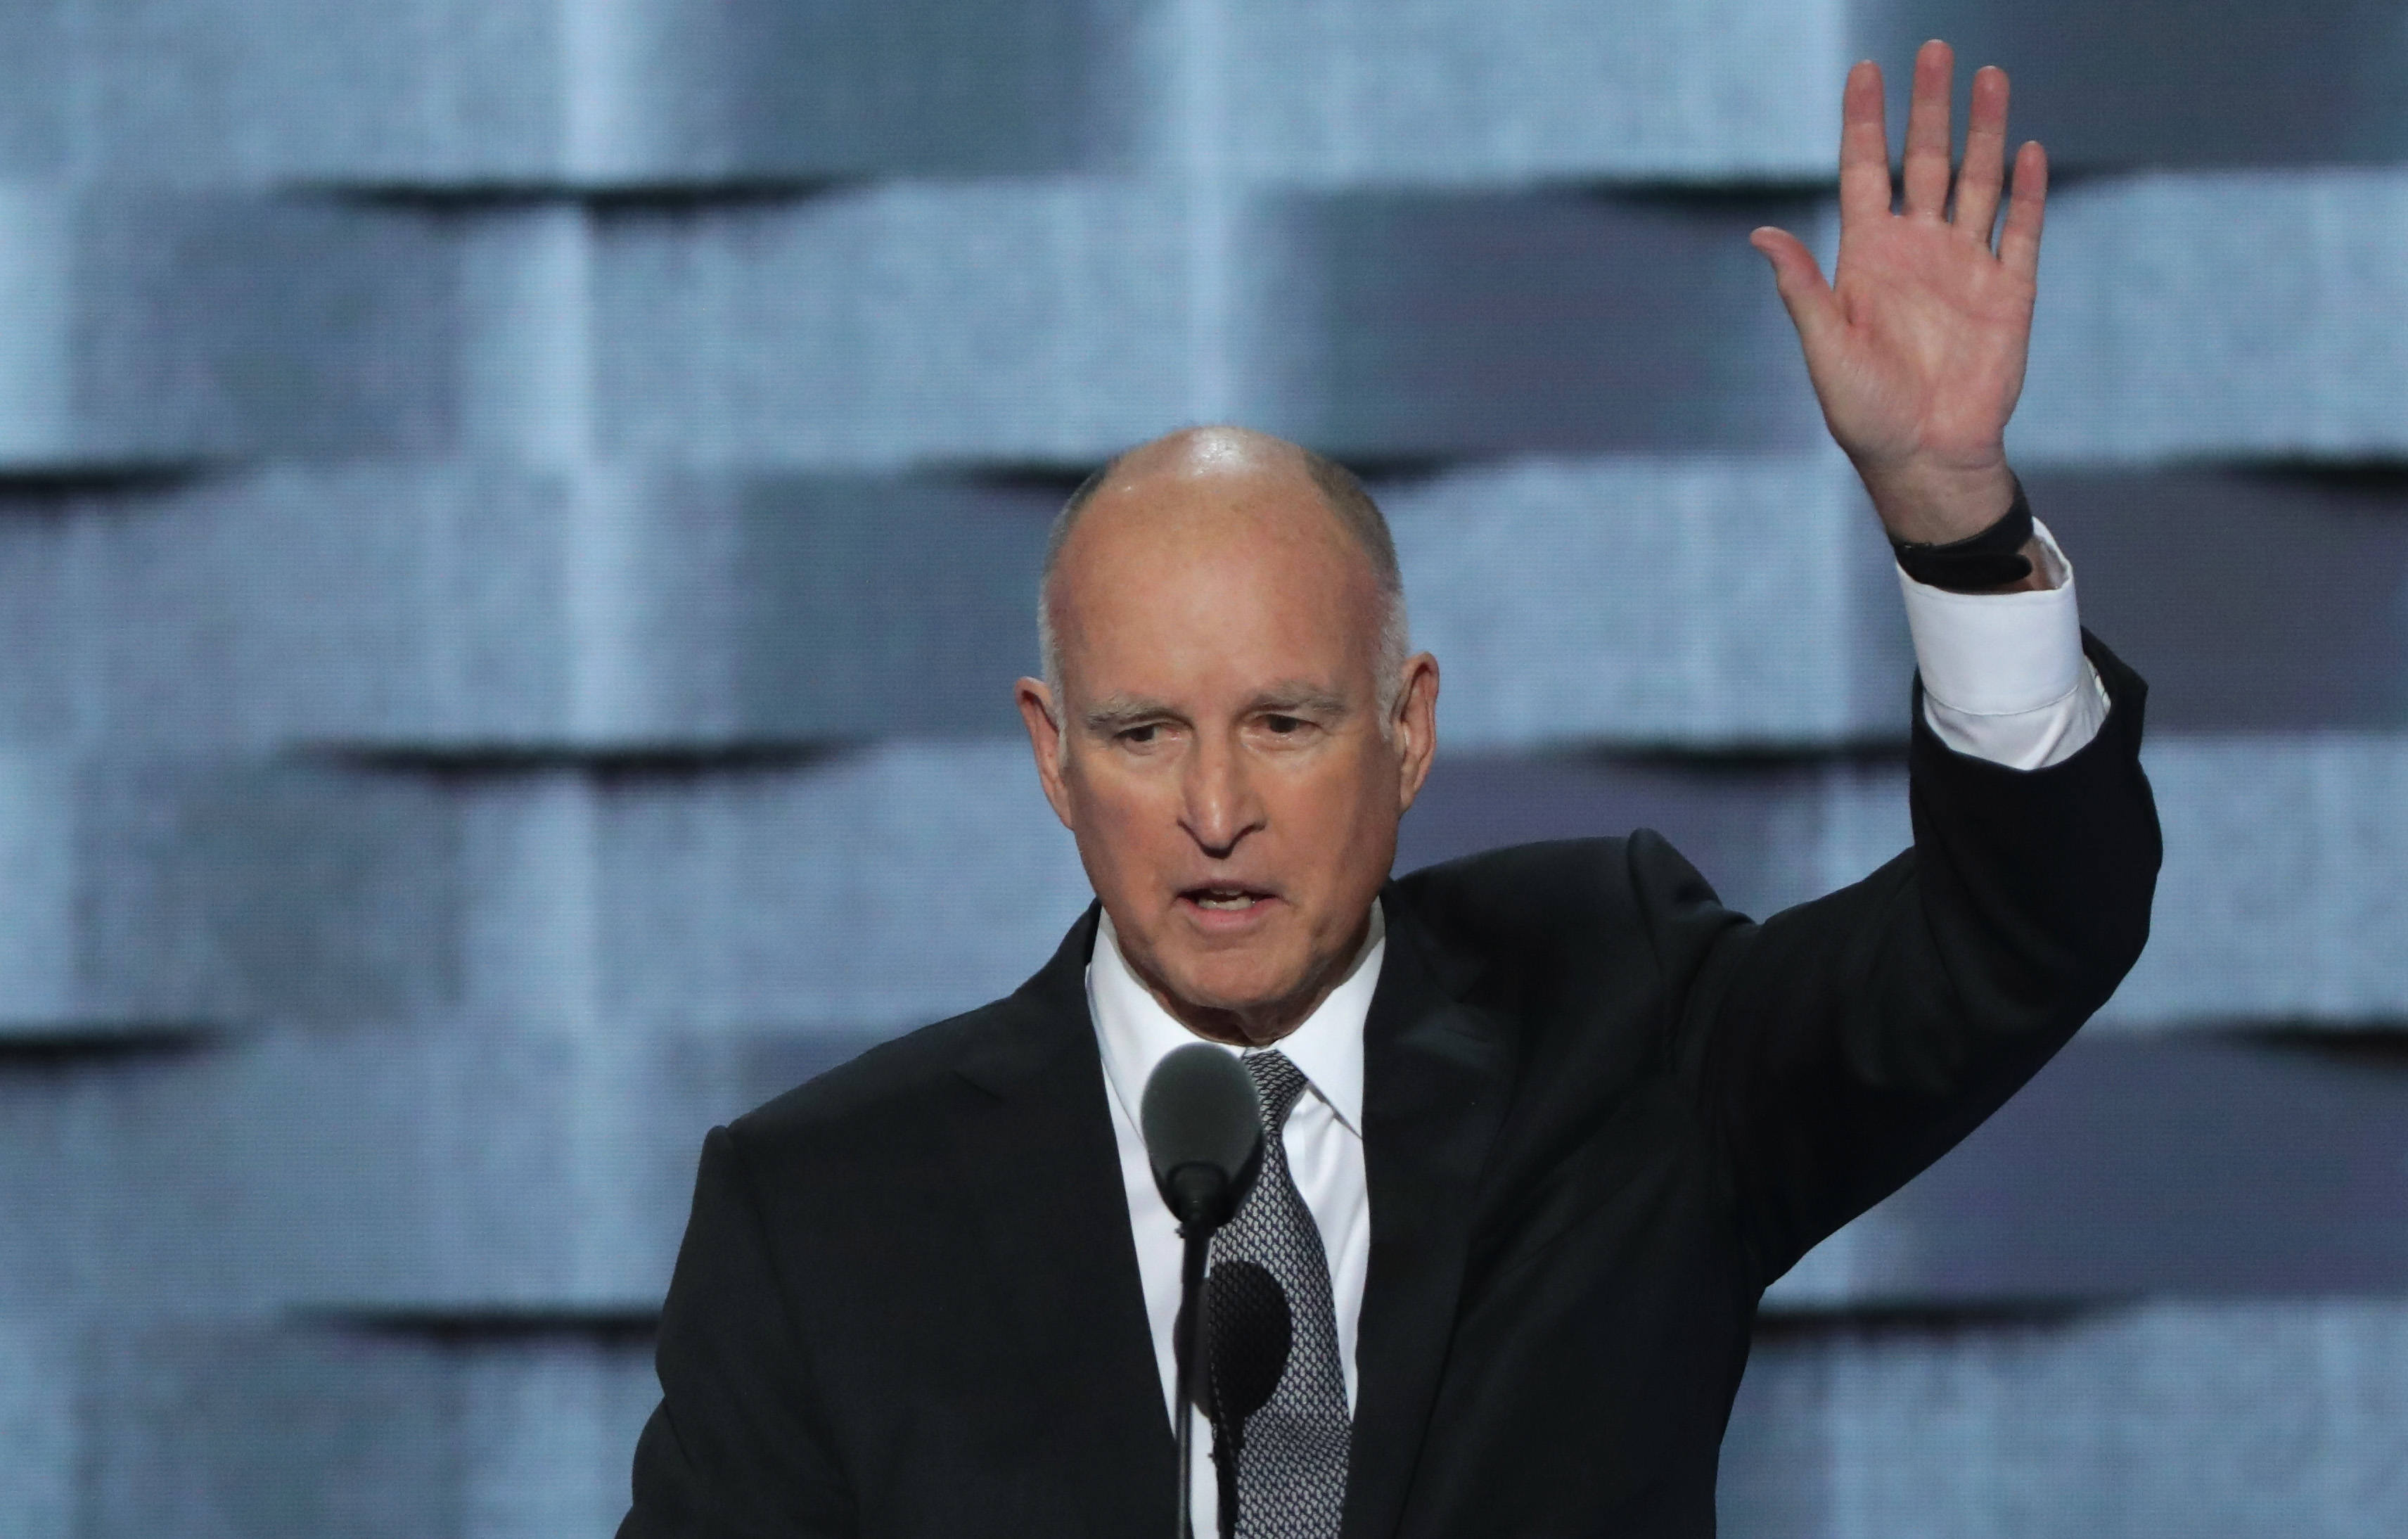 California Governor Jerry Brown delivers remarks on the third day of the Democratic National Convention at the Wells Fargo Center, July 27, 2016 in Philadelphia, Pennsylvania. (Alex Wong—Getty Images)